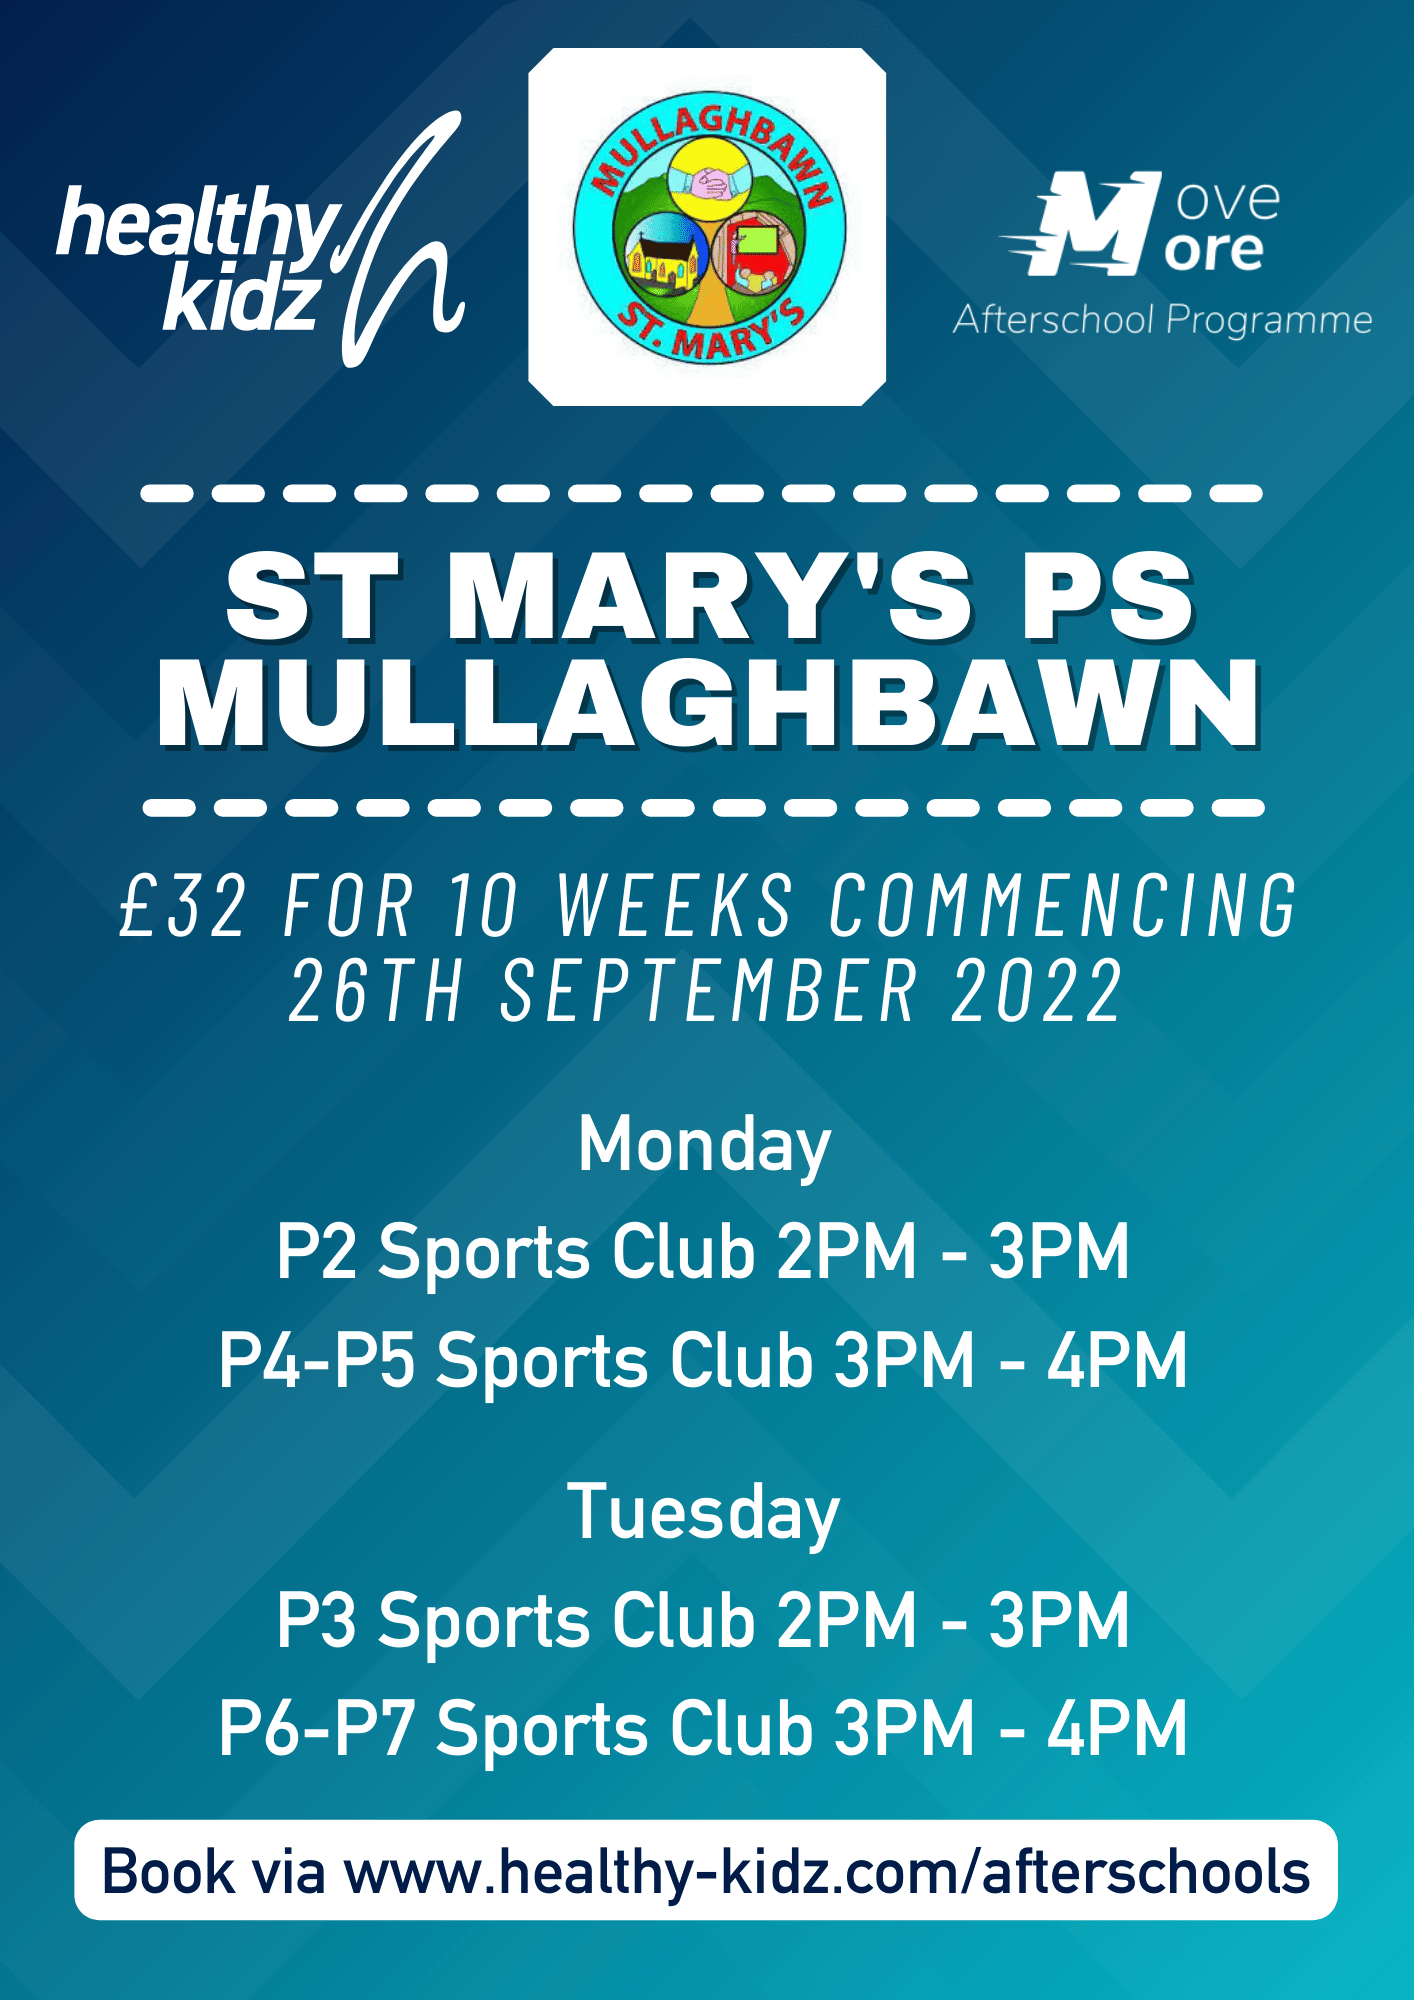 Healthy Kidz Afterschools at St Mary’s PS, Mullaghbawn Term 1 Block 1